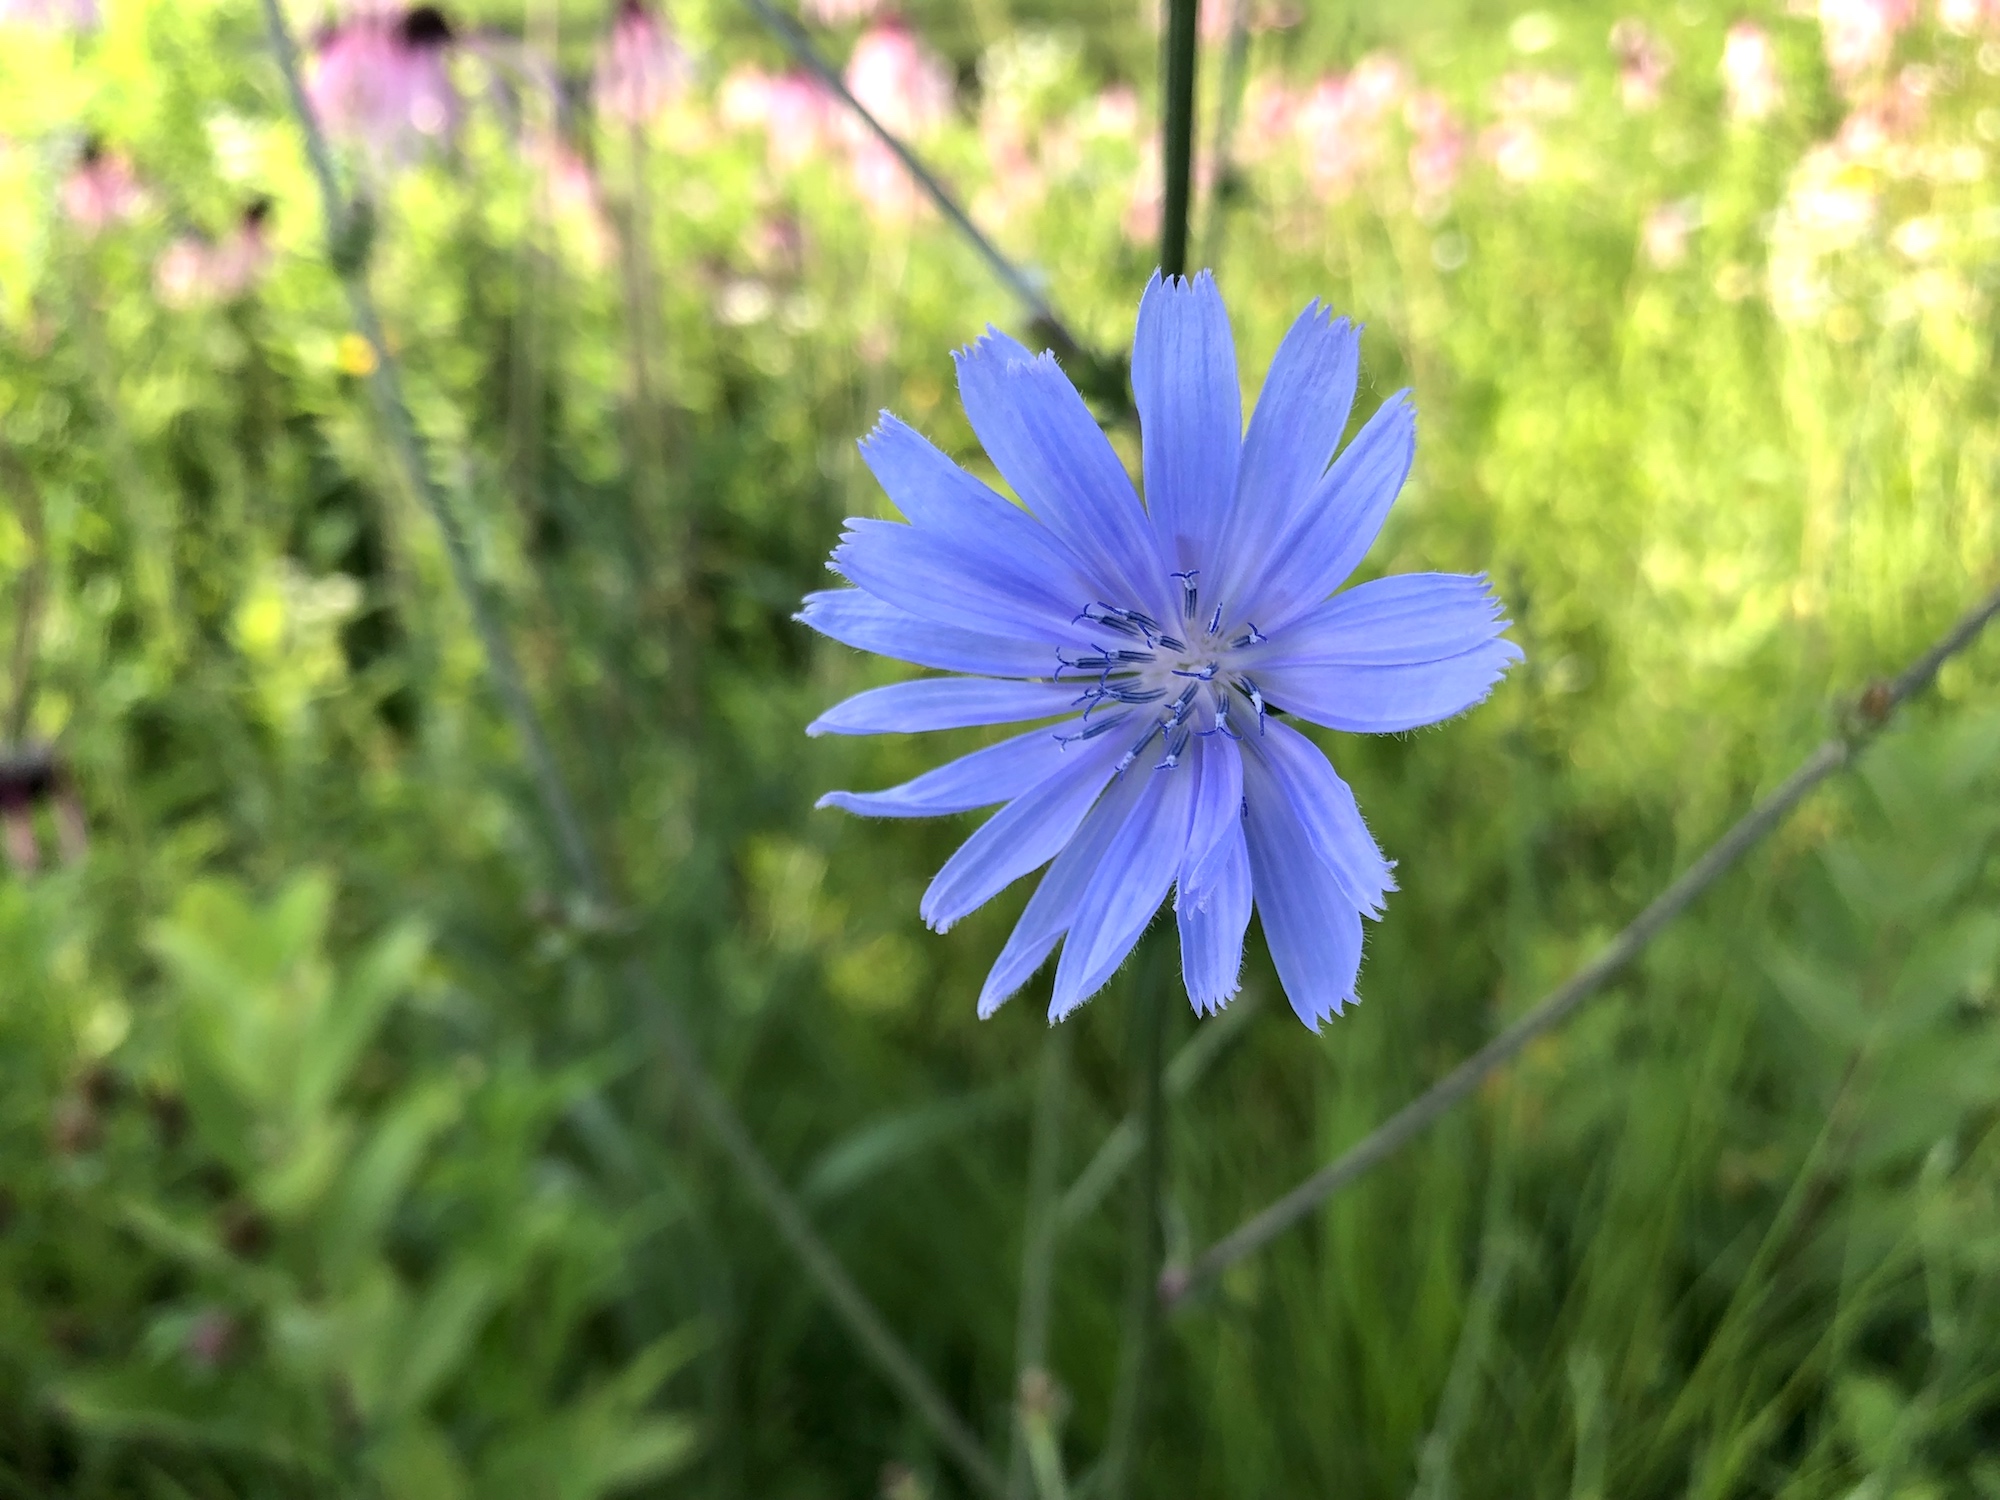 Chicory on banks of Retaining Pond in Madison, Wisconsin on July 5, 2019.